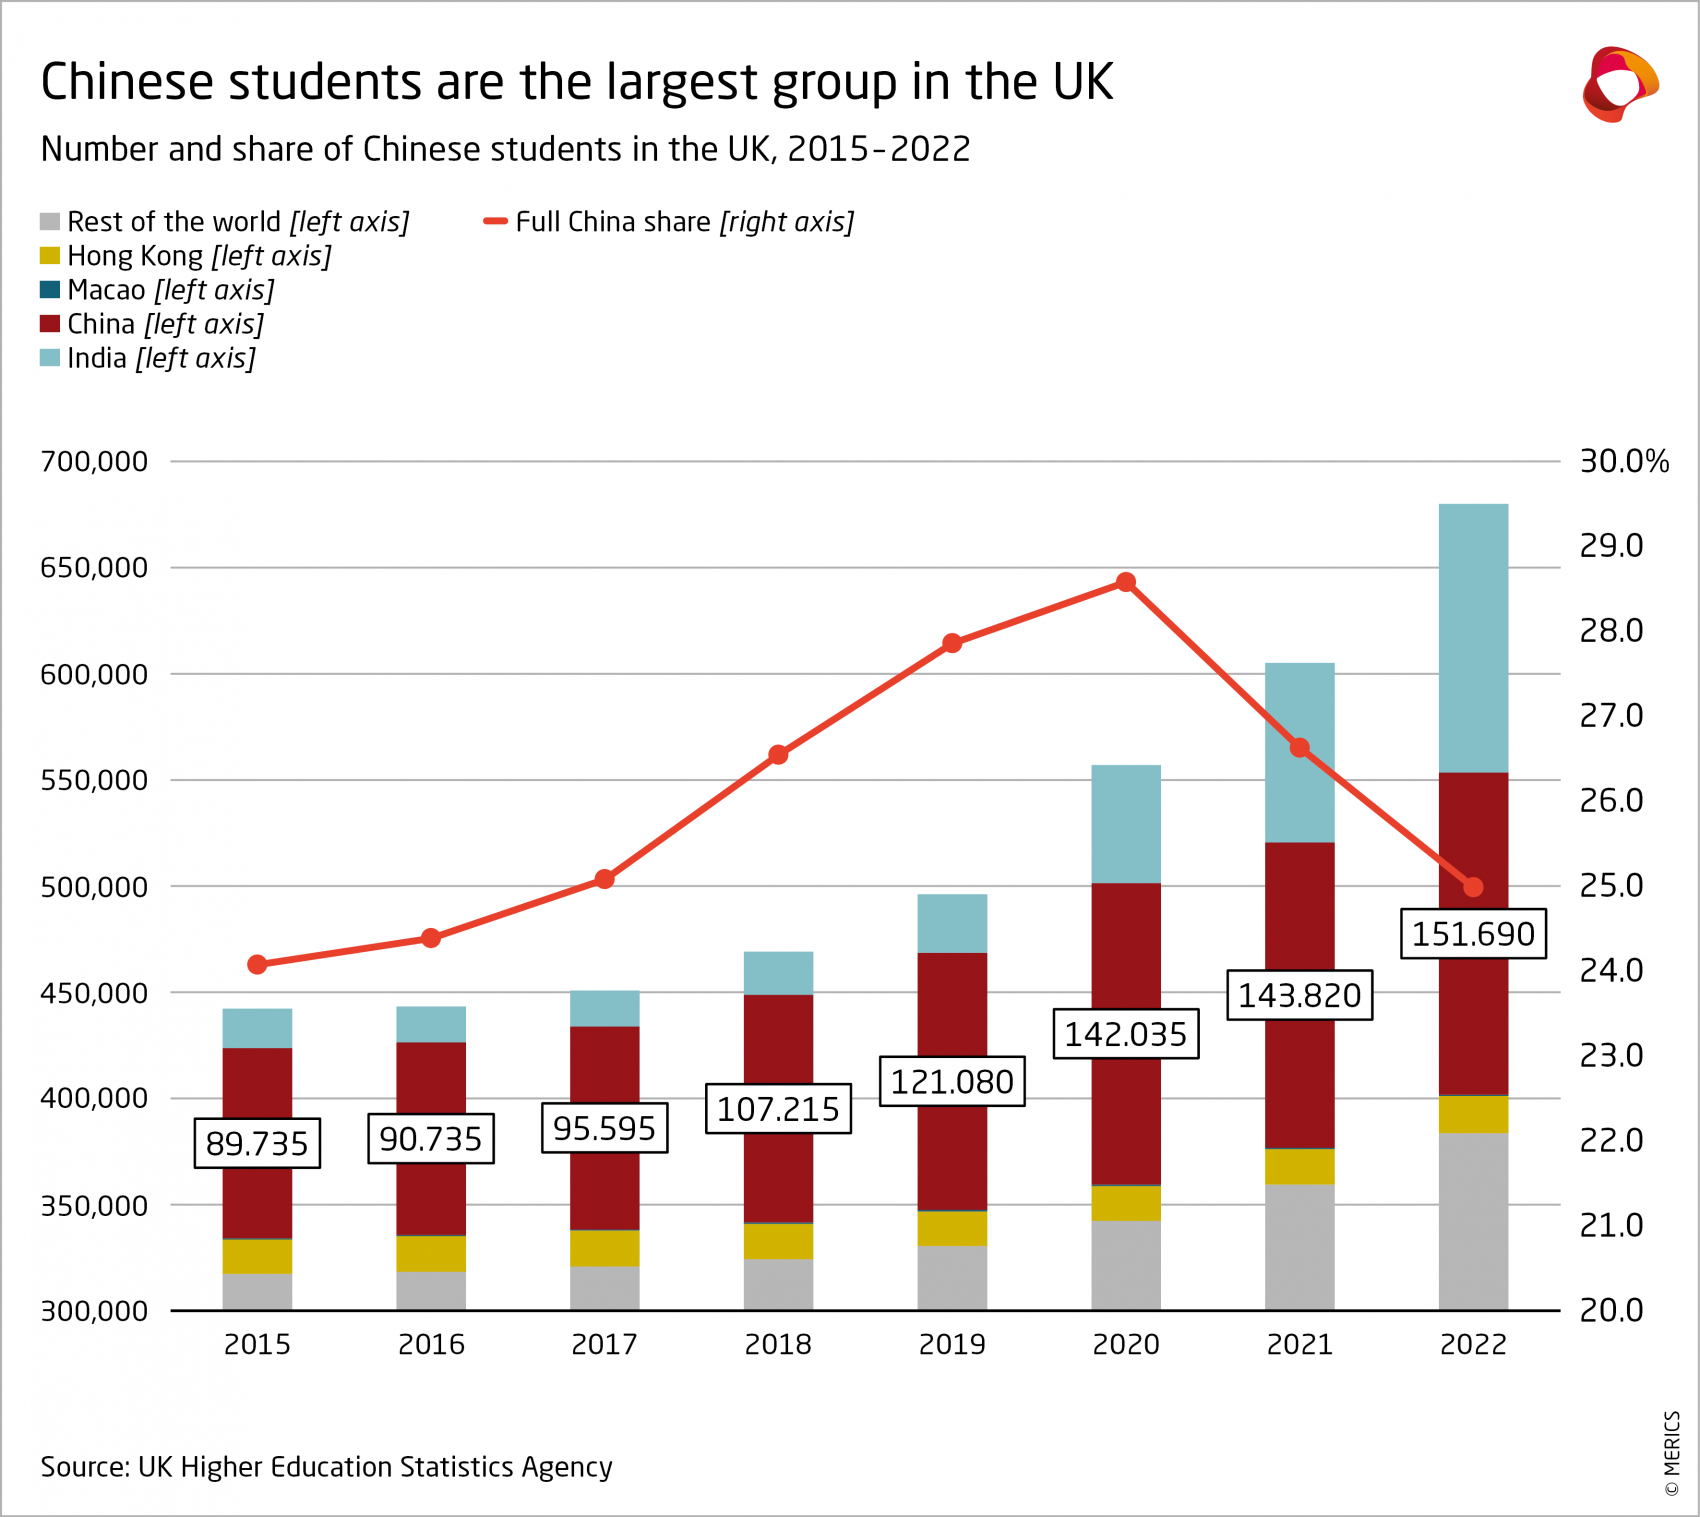 Number and share of Chinese students in the UK, 2015-2022